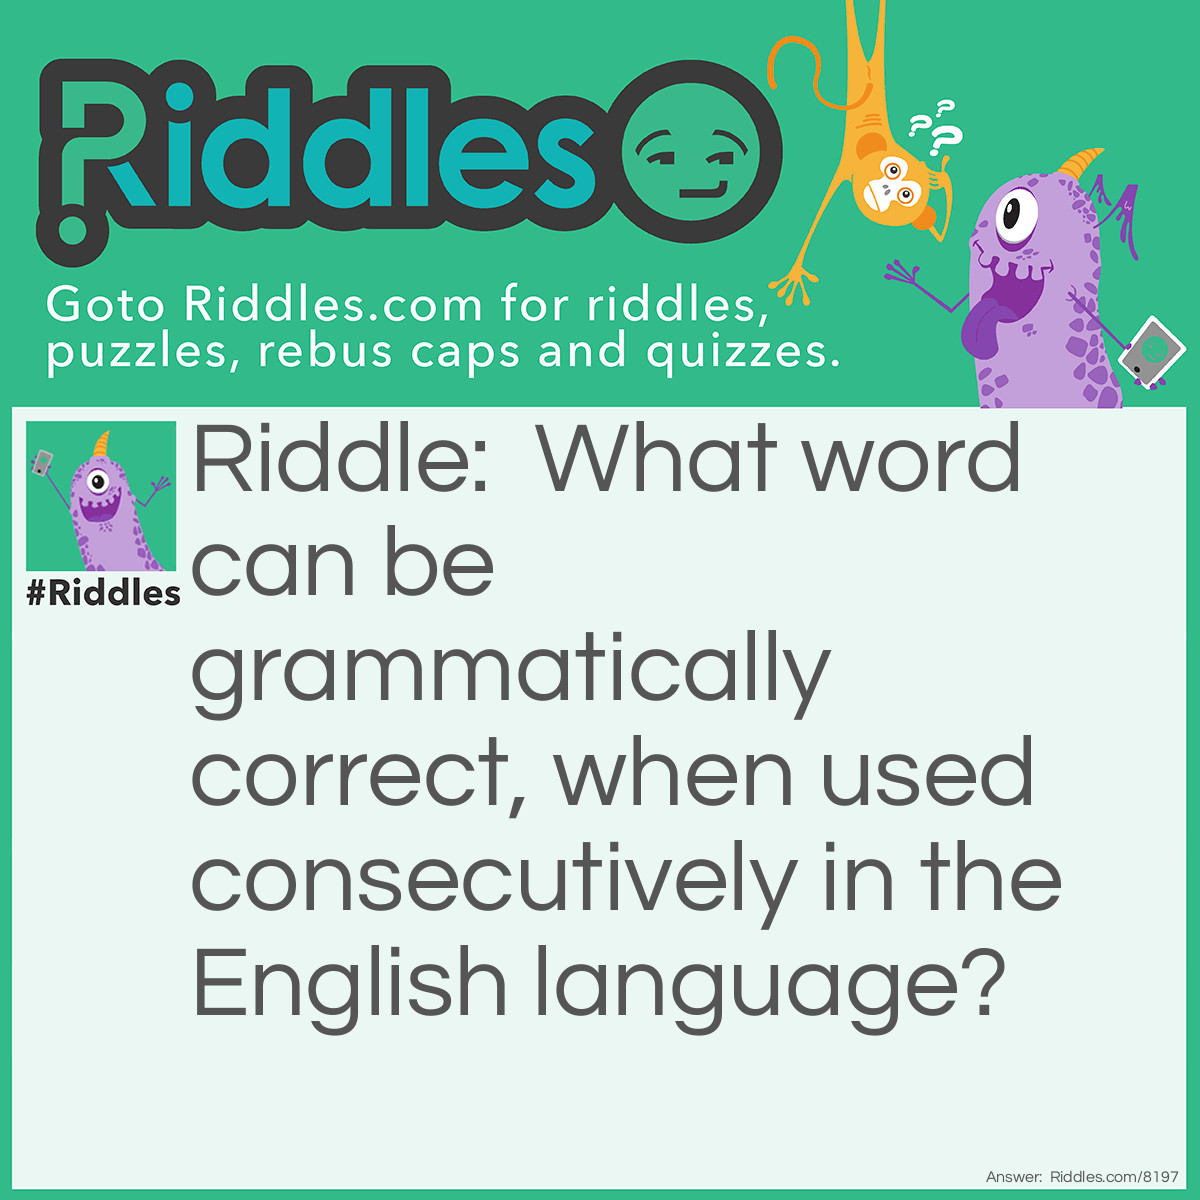 Riddle: What word can be grammatically correct, when used consecutively in the English language? Answer: Had:'"James while John had had had had had had had had had had had a better effect on the teacher" is an English sentence used to demonstrate lexical ambiguity and the necessity of punctuation, which serves as a substitute for the intonation, stress, and pauses found in speech."-Wikipedia. Cool, Huh?